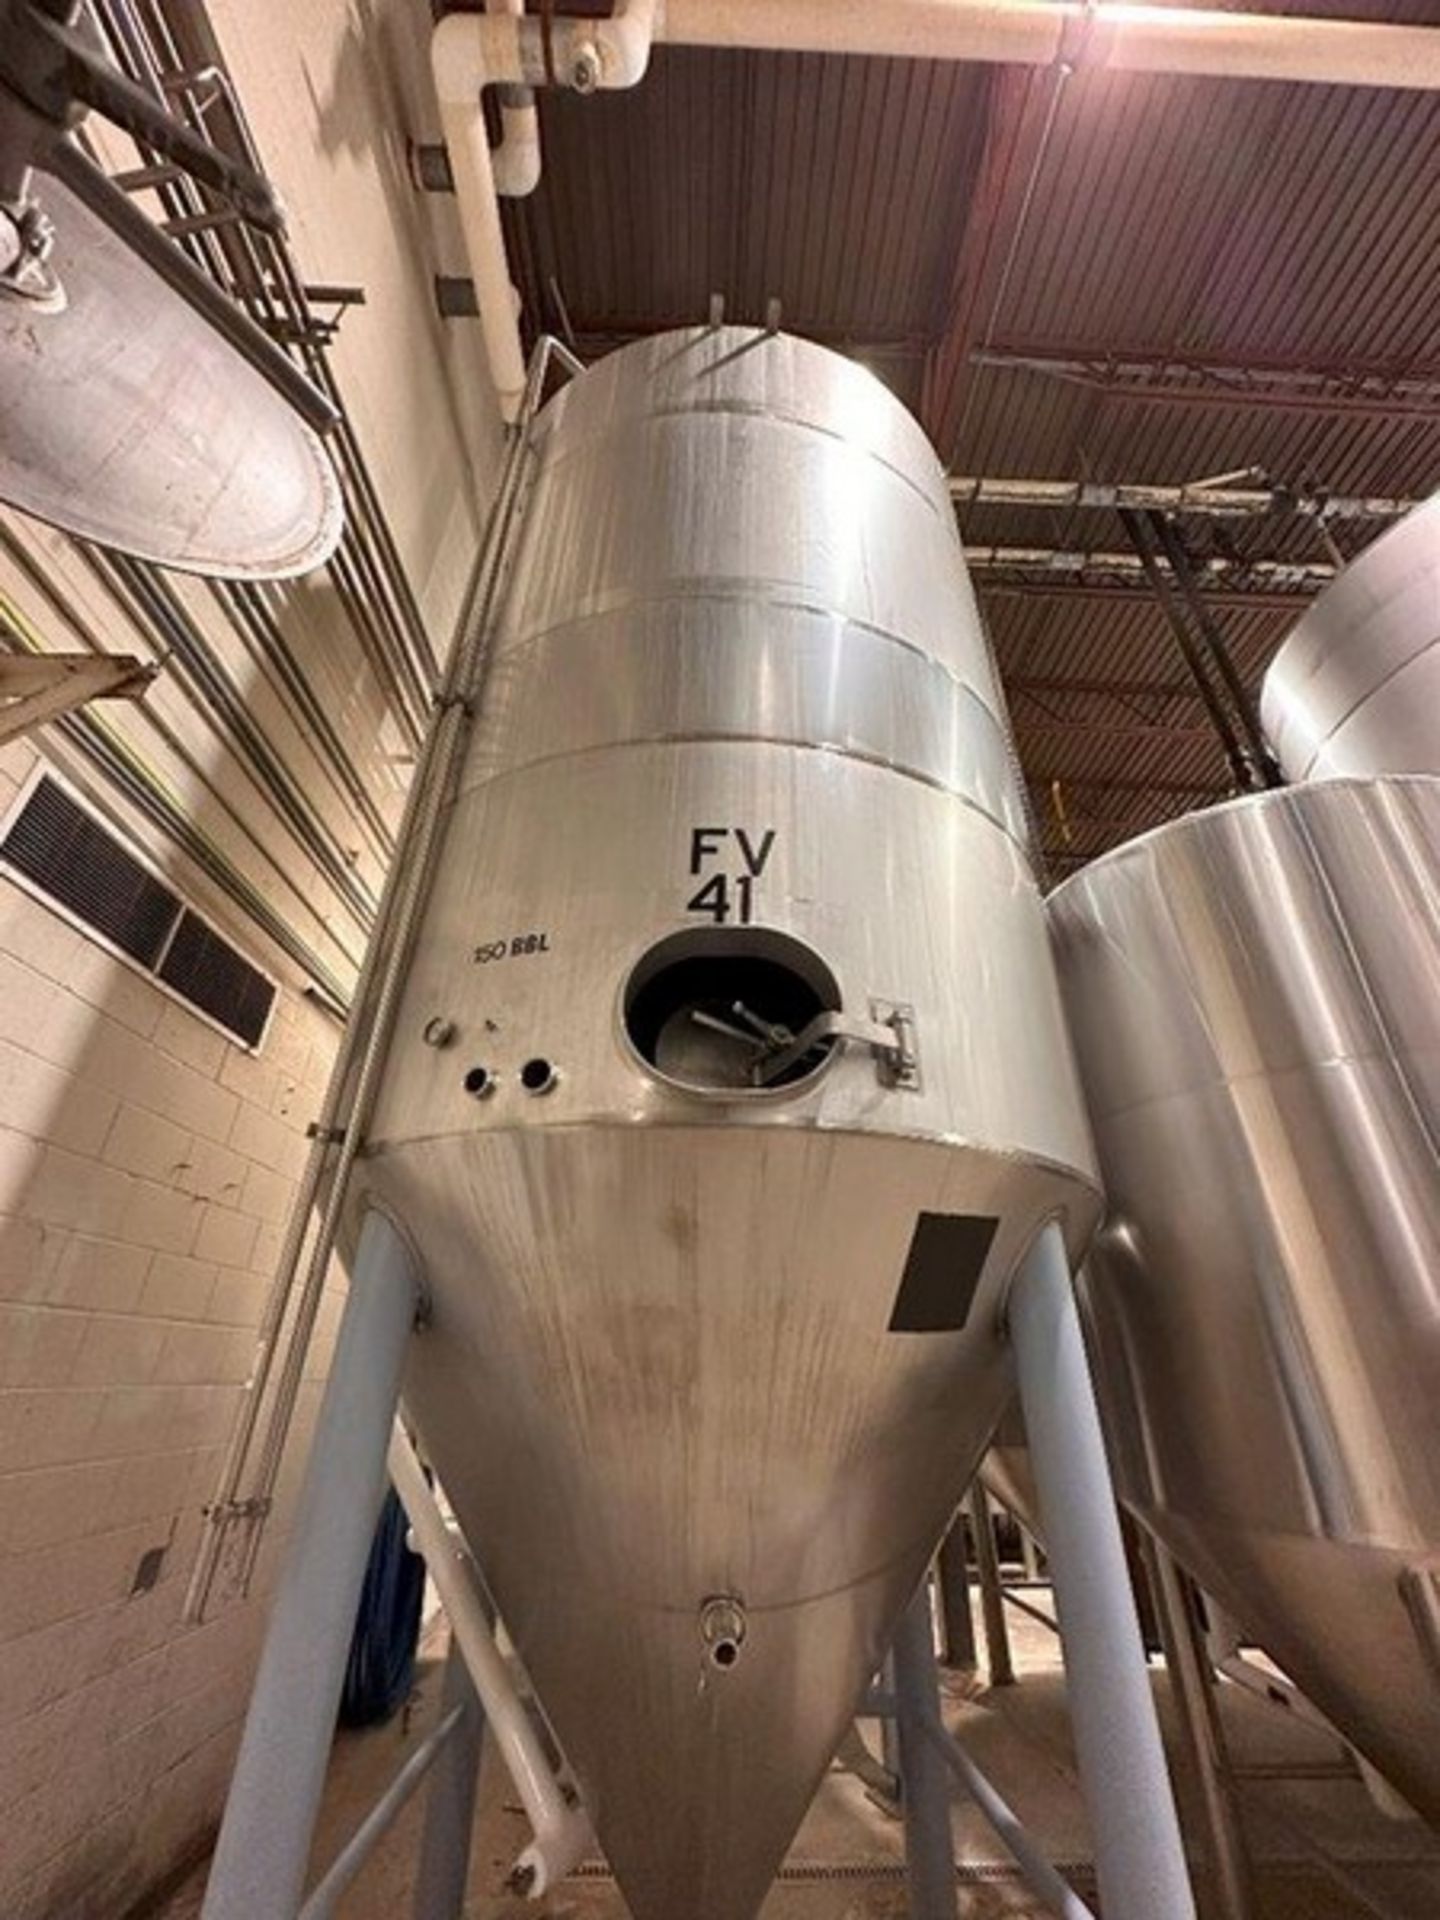 150 BBL (4650 Gallon) Vertical Cone Bottom 304 Stainless Steel Jacketed Vessel. Manufactured by Sant - Image 2 of 7